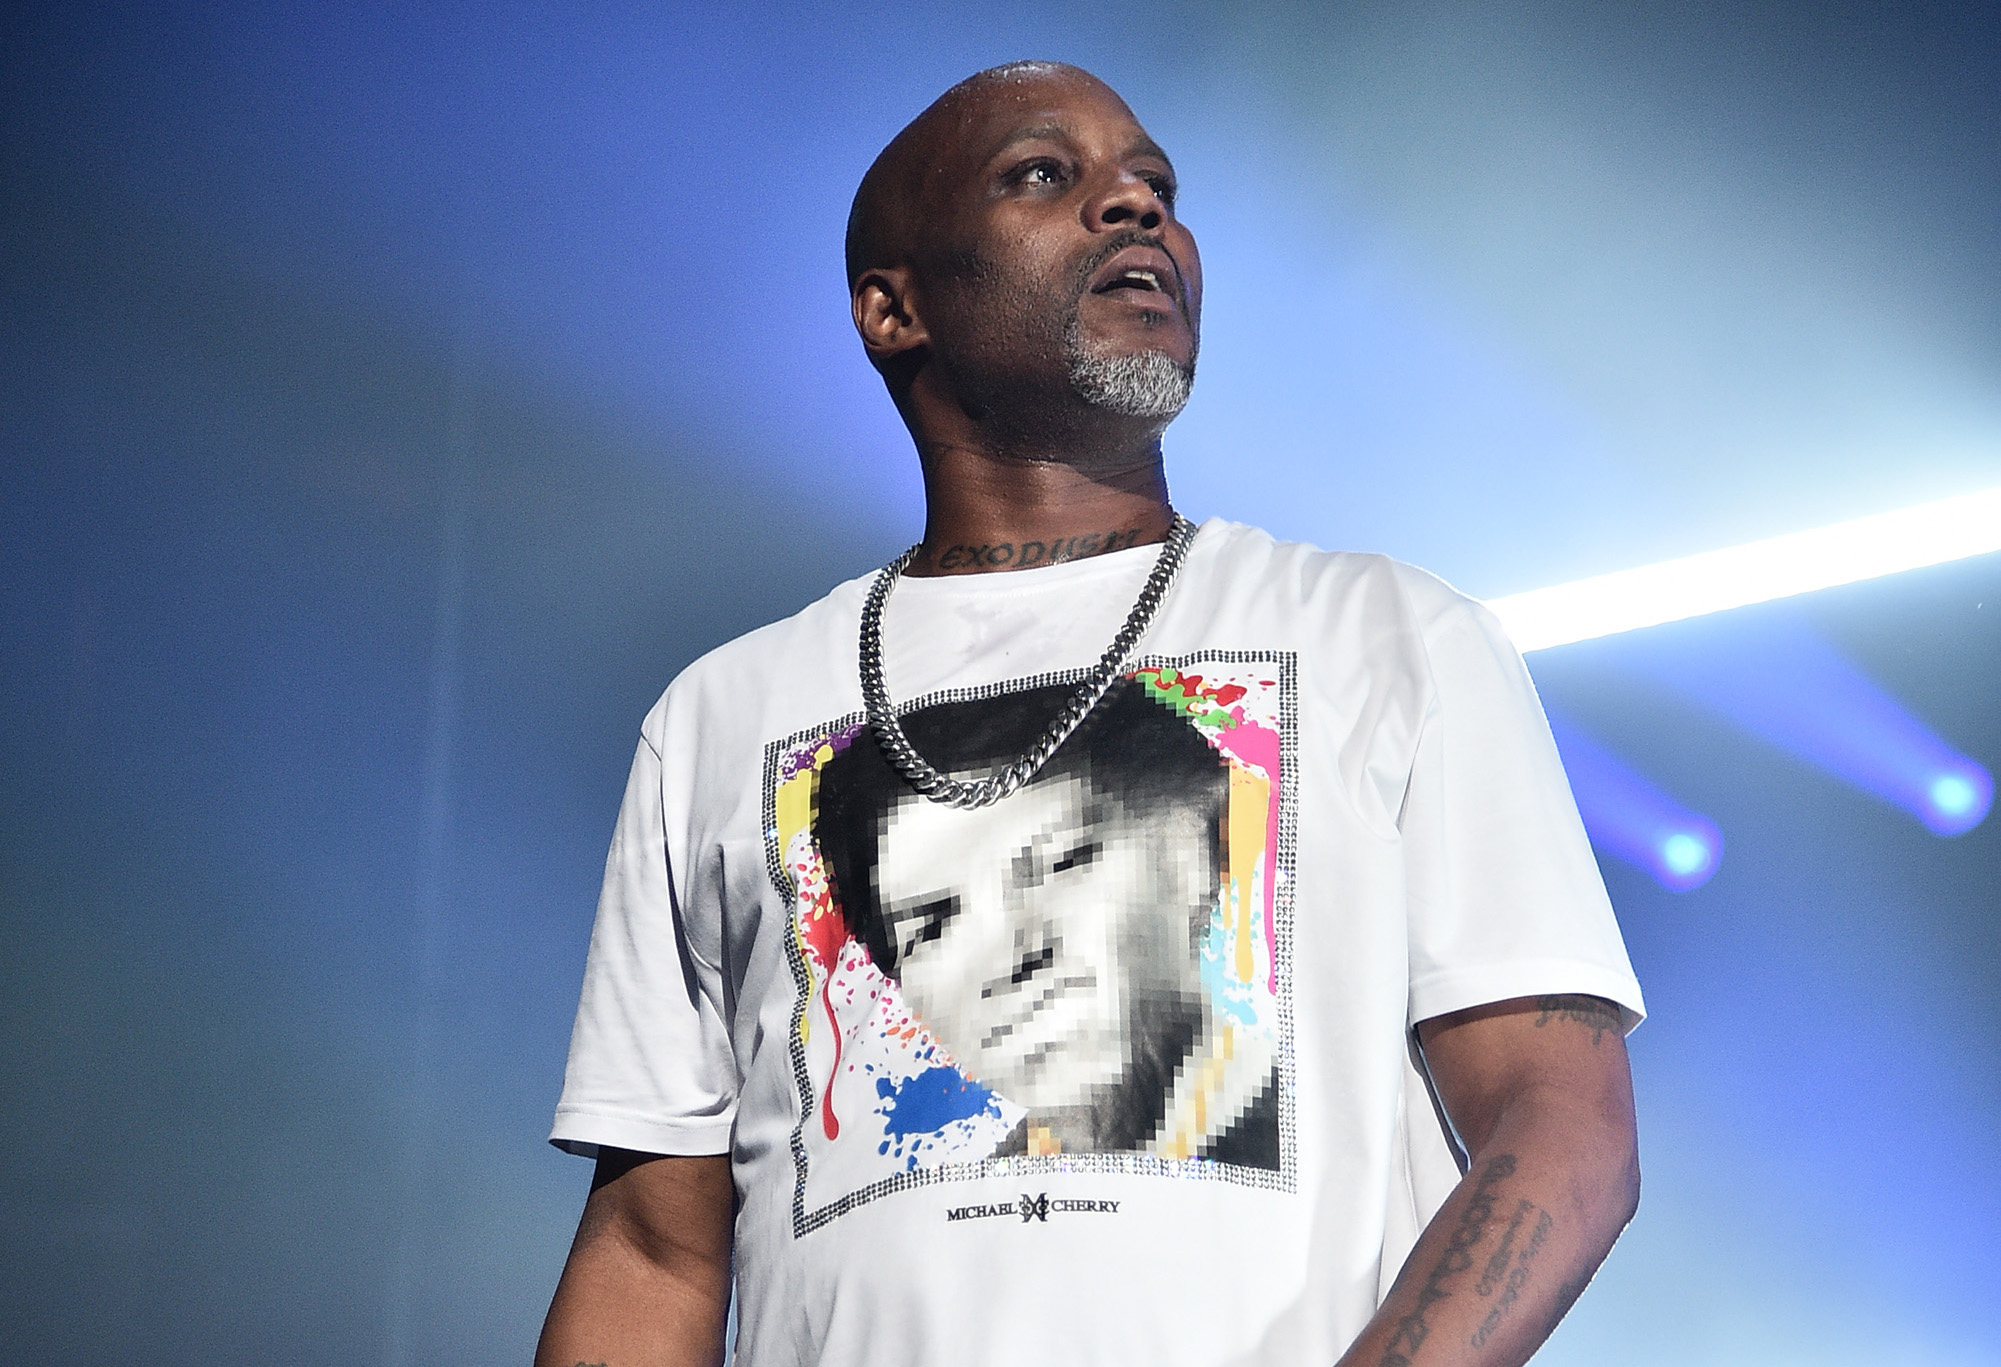 DMX’s Final Interview Reveals He Wanted To “Thank God For Every Moment” Before Death